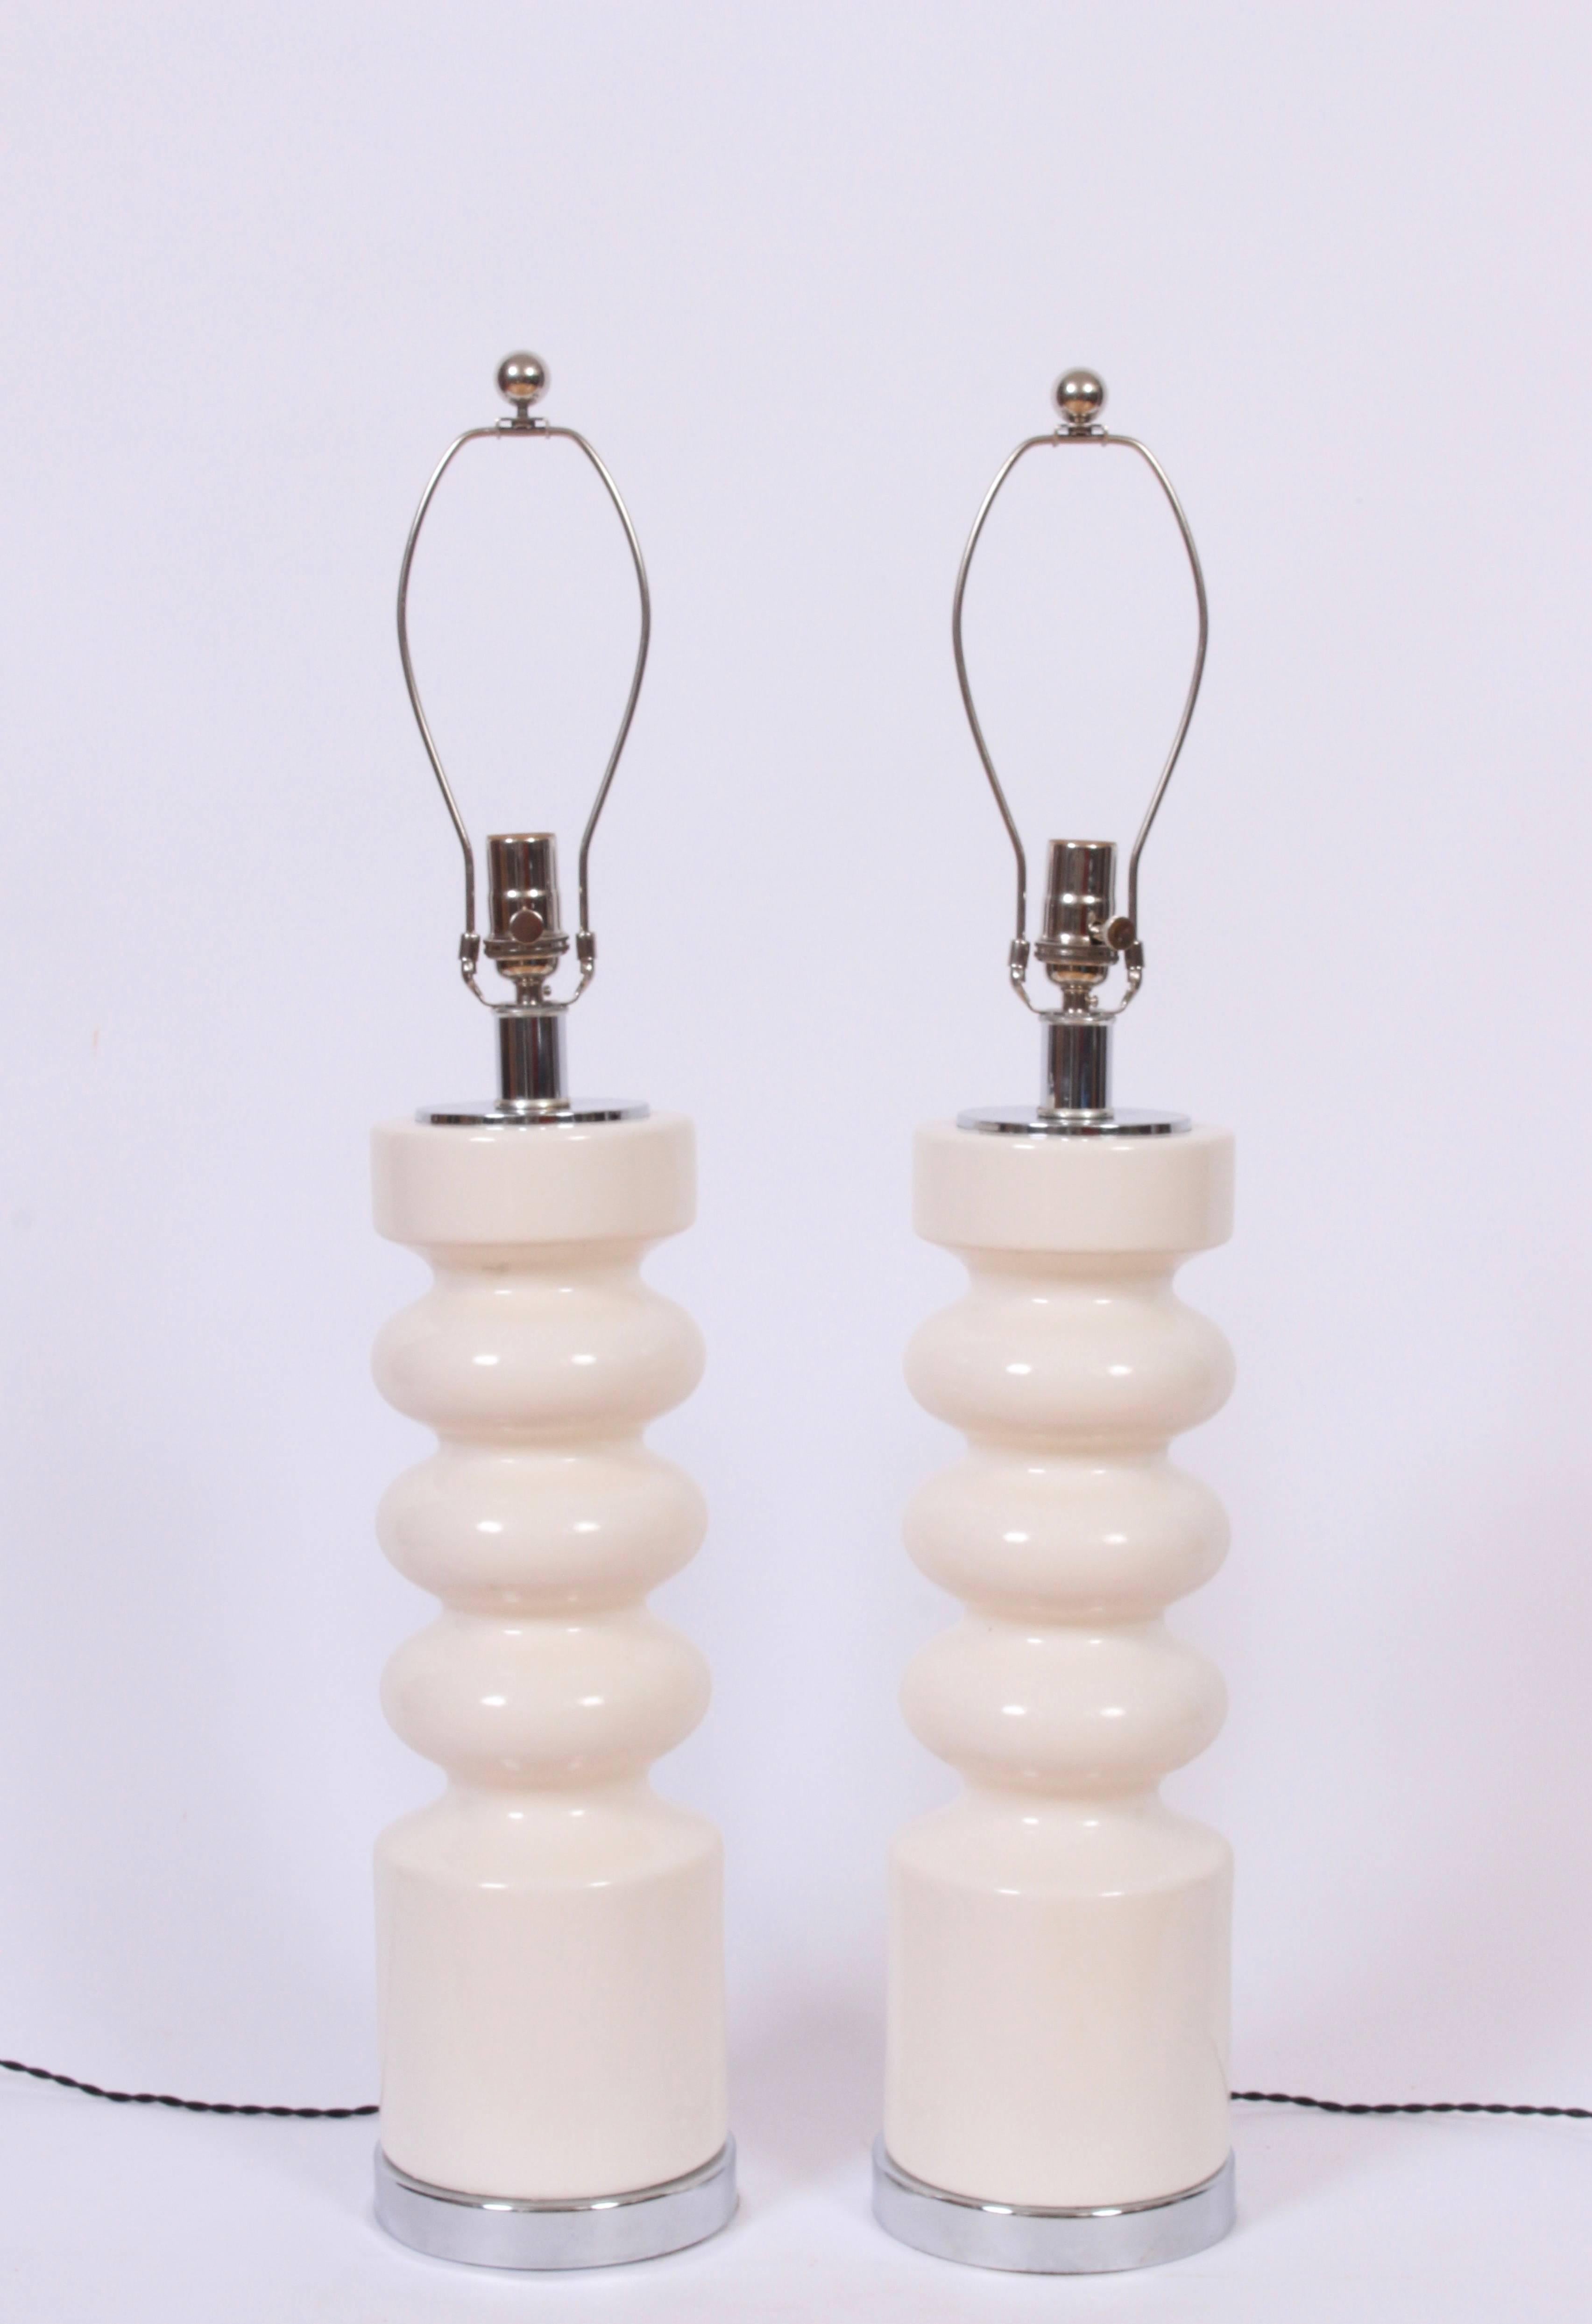 Large pair of Modern Laurel Lamp company stacked off-white ceramic and chrome table lamps. Reflective triple orb form in glazed creamy white ceramic with chrome base and cap. 
24H to top of socket. Shade shown for display only (10 H x 18 D top x 19